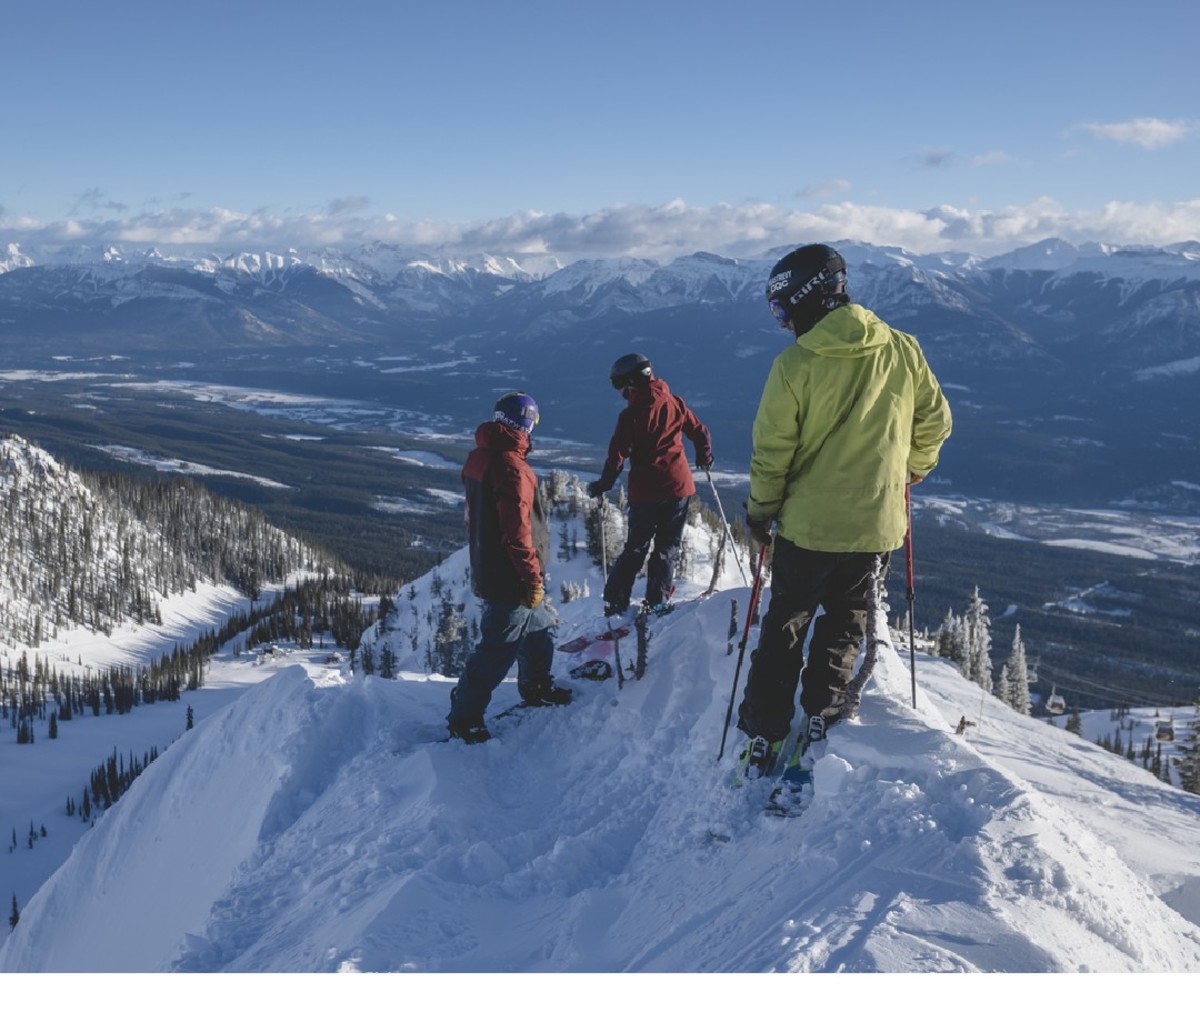 Skiers perched on a snowy peak at Kicking Horse Mountain Resort, British Columbia